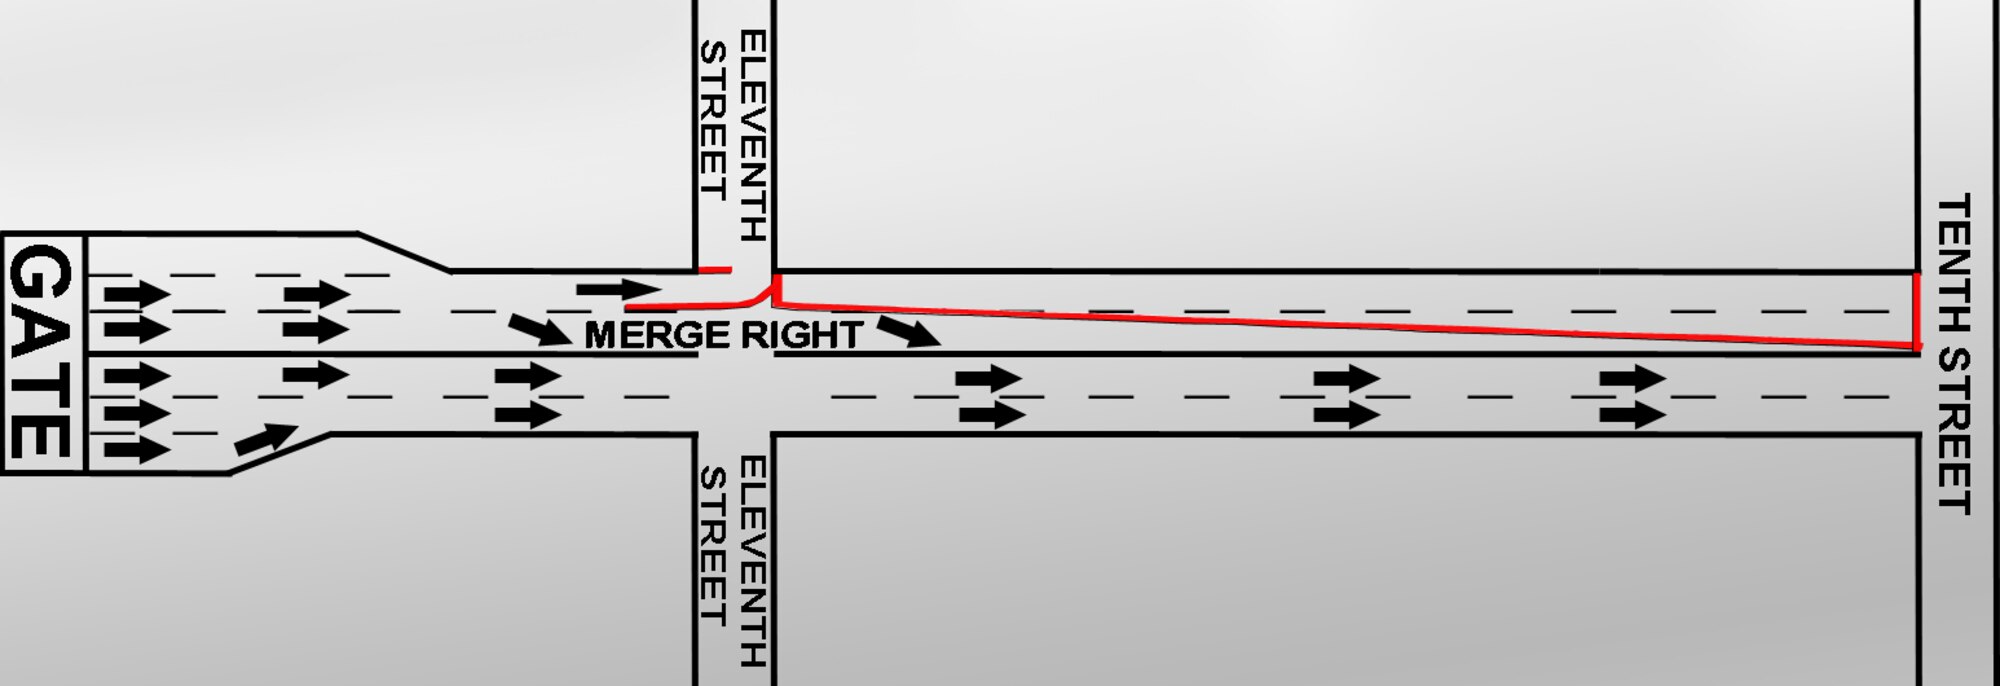 This graphic shows how traffic will merge once motorists get through the gate. (U.S. Air Force graphic illustration by Tommie Horton)